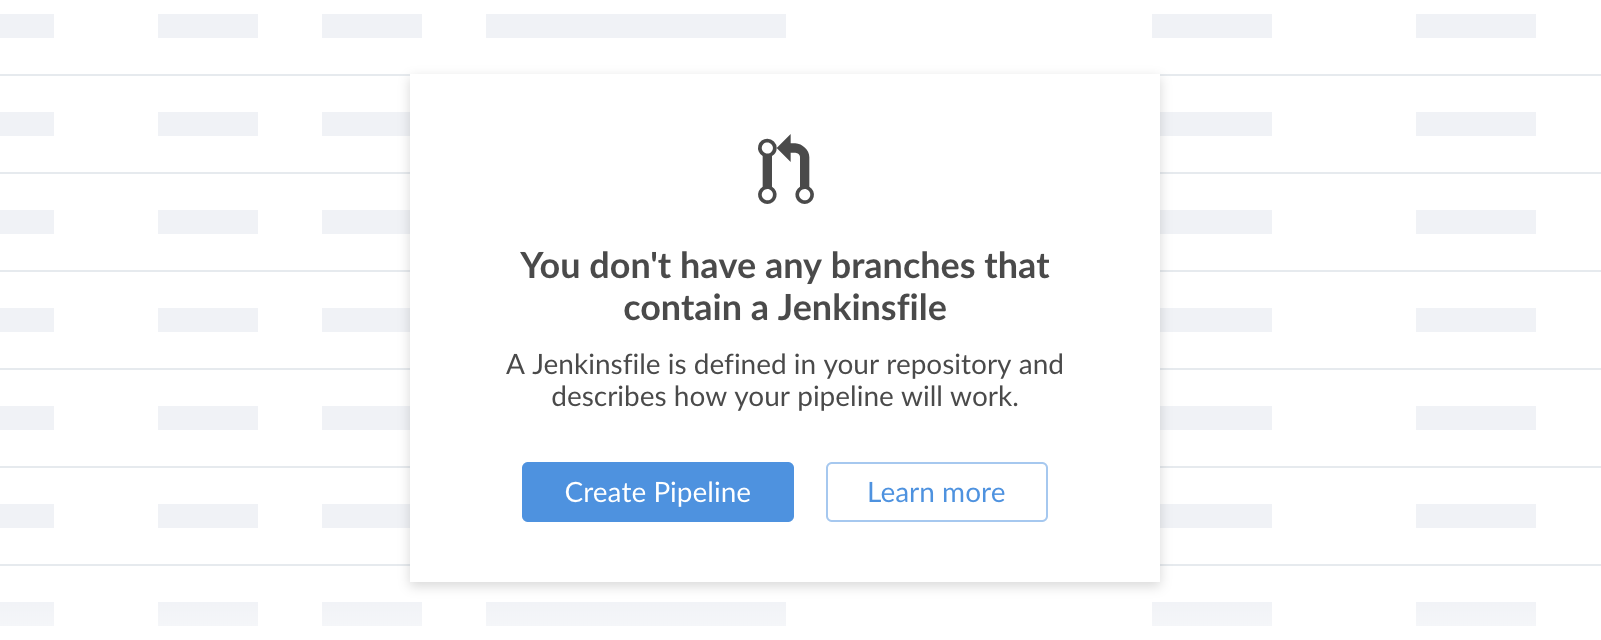 Pipeline creation - creating a Jenkinsfile prompt